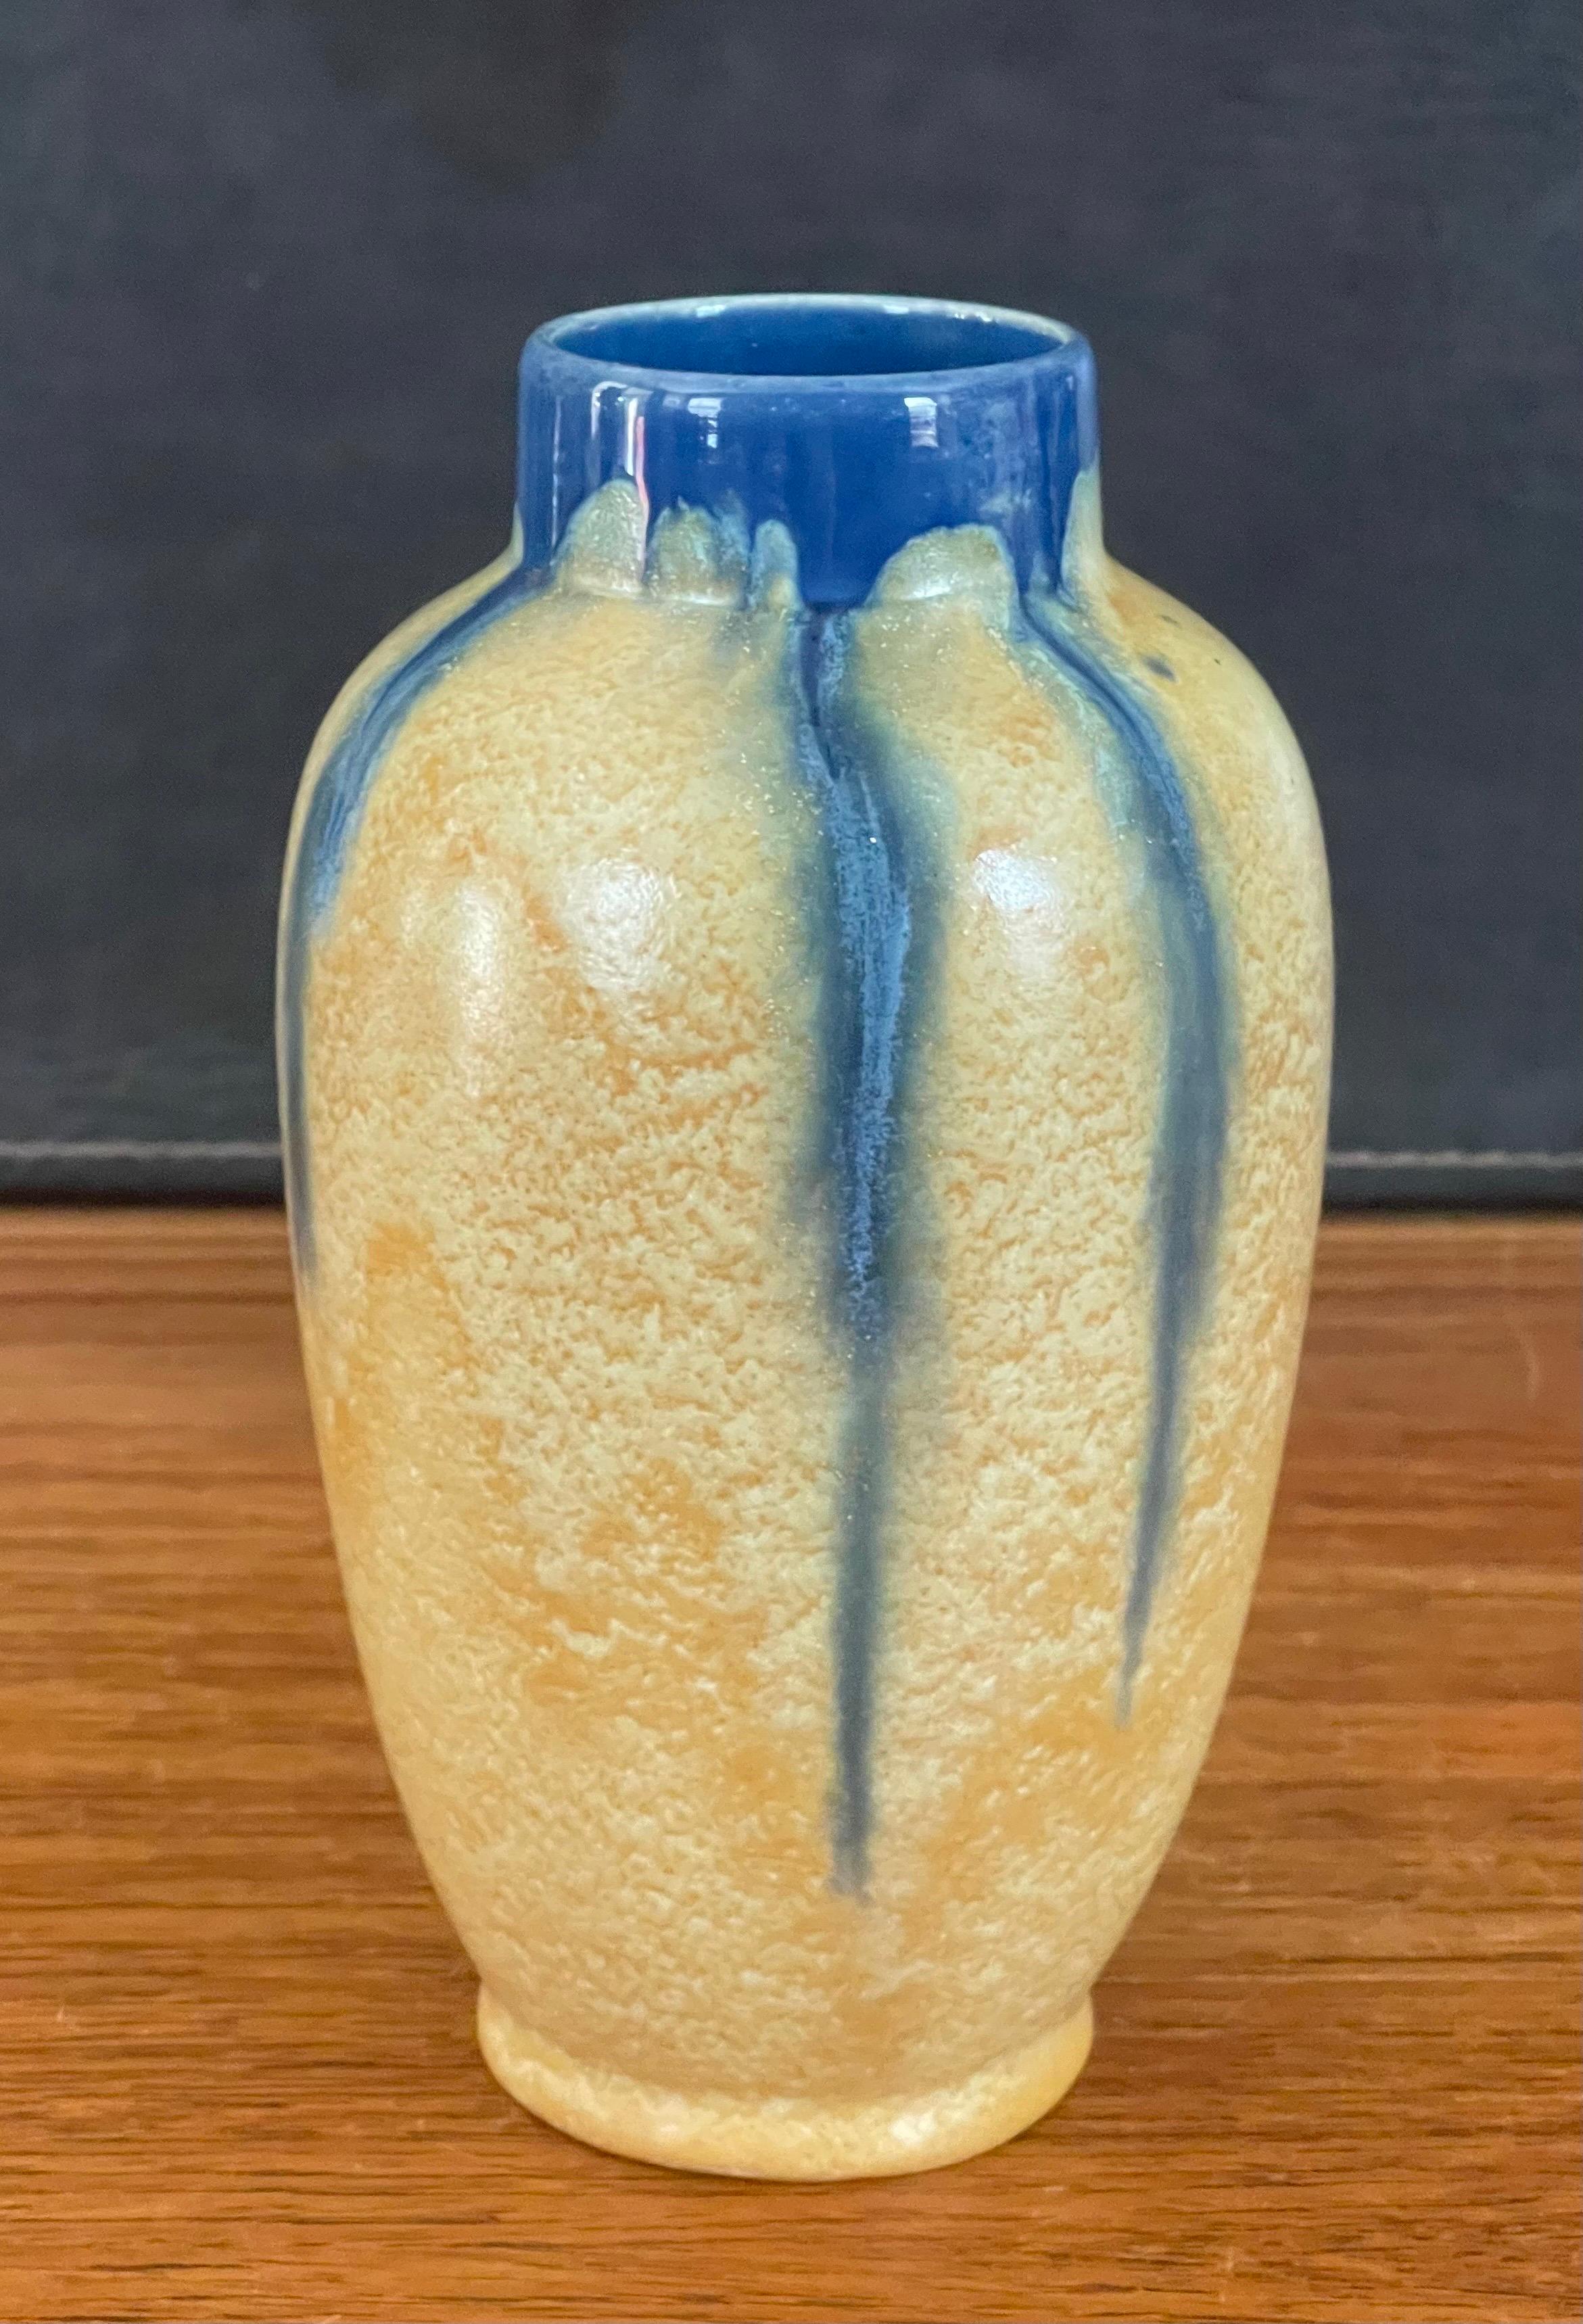 A very nice MCM drip glazed vase by Flamand J.W.C. of Belgium, circa 1960s. The vase is in very good vintage condition with no chips or cracks and measures 4.25